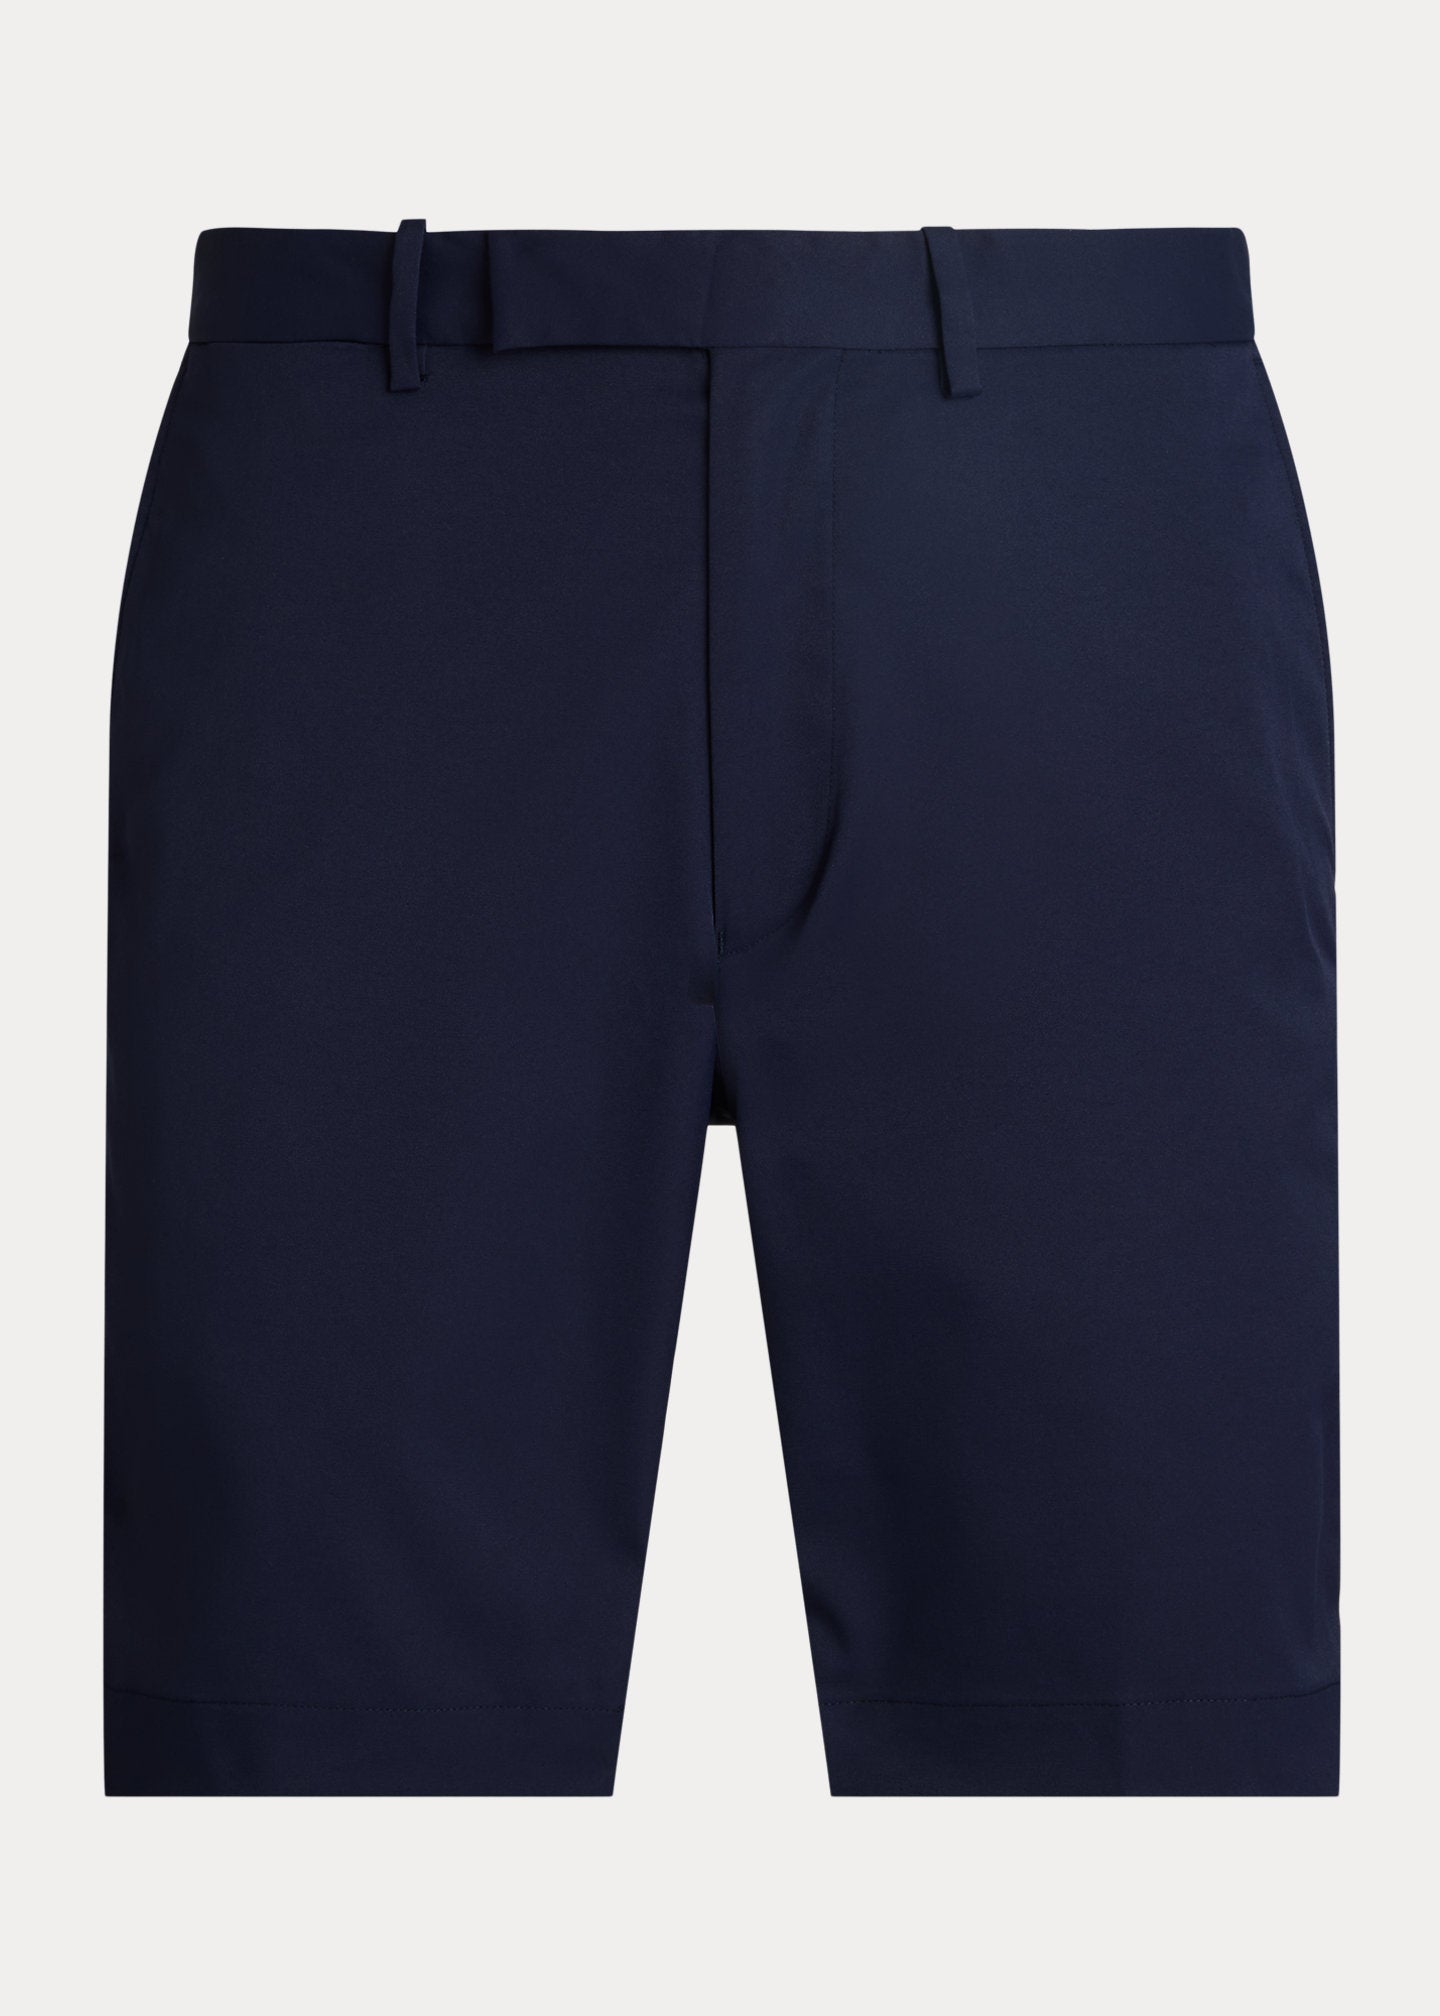 RLX Tailored Fit Performance Short